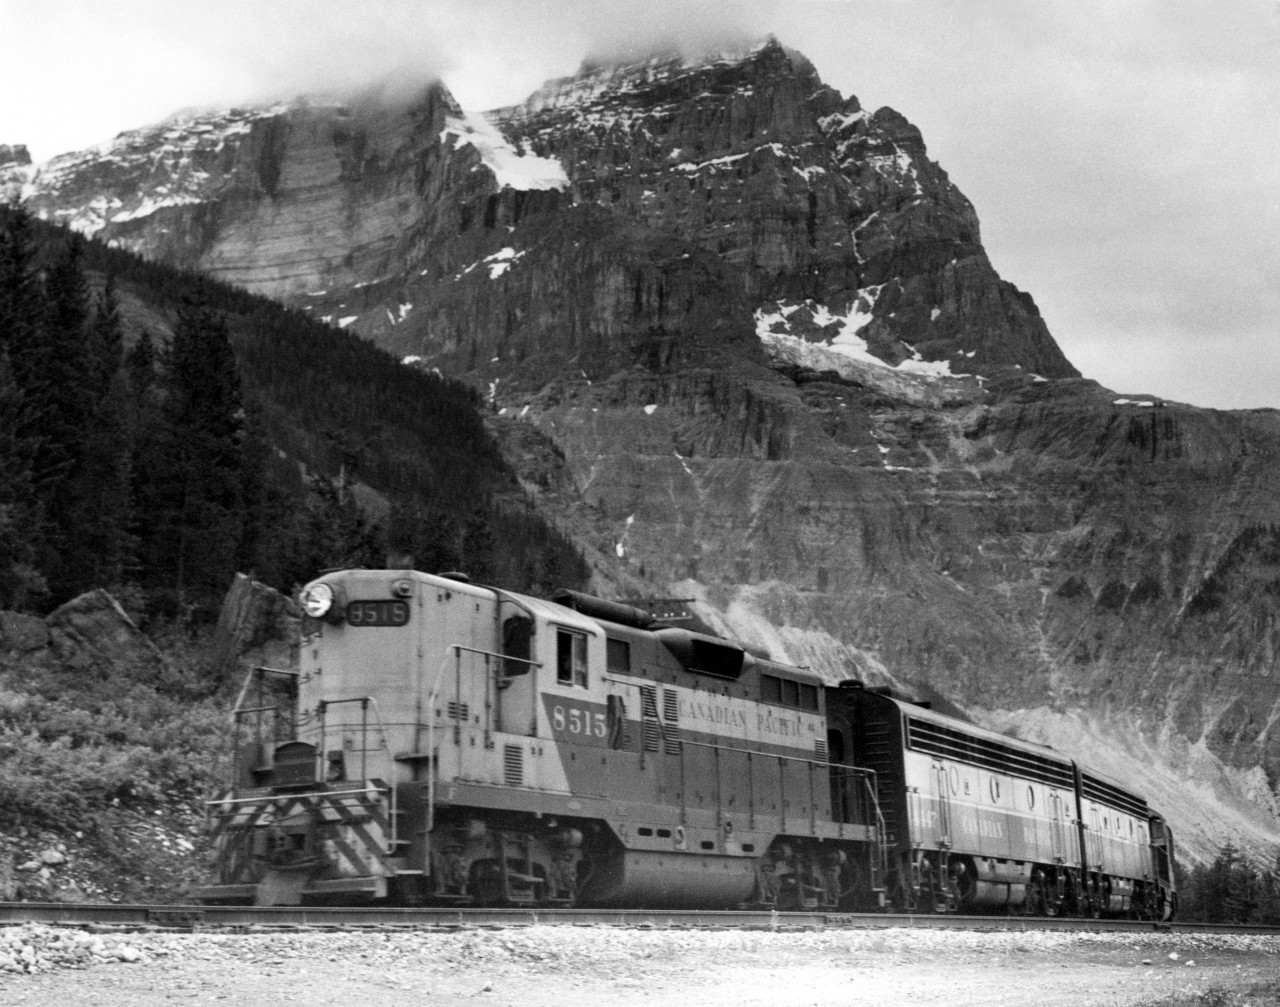 Second section of train 7 with engine 8515 at Yoho.  The road at left is part of the original 4.5% "Big Hill" grade.